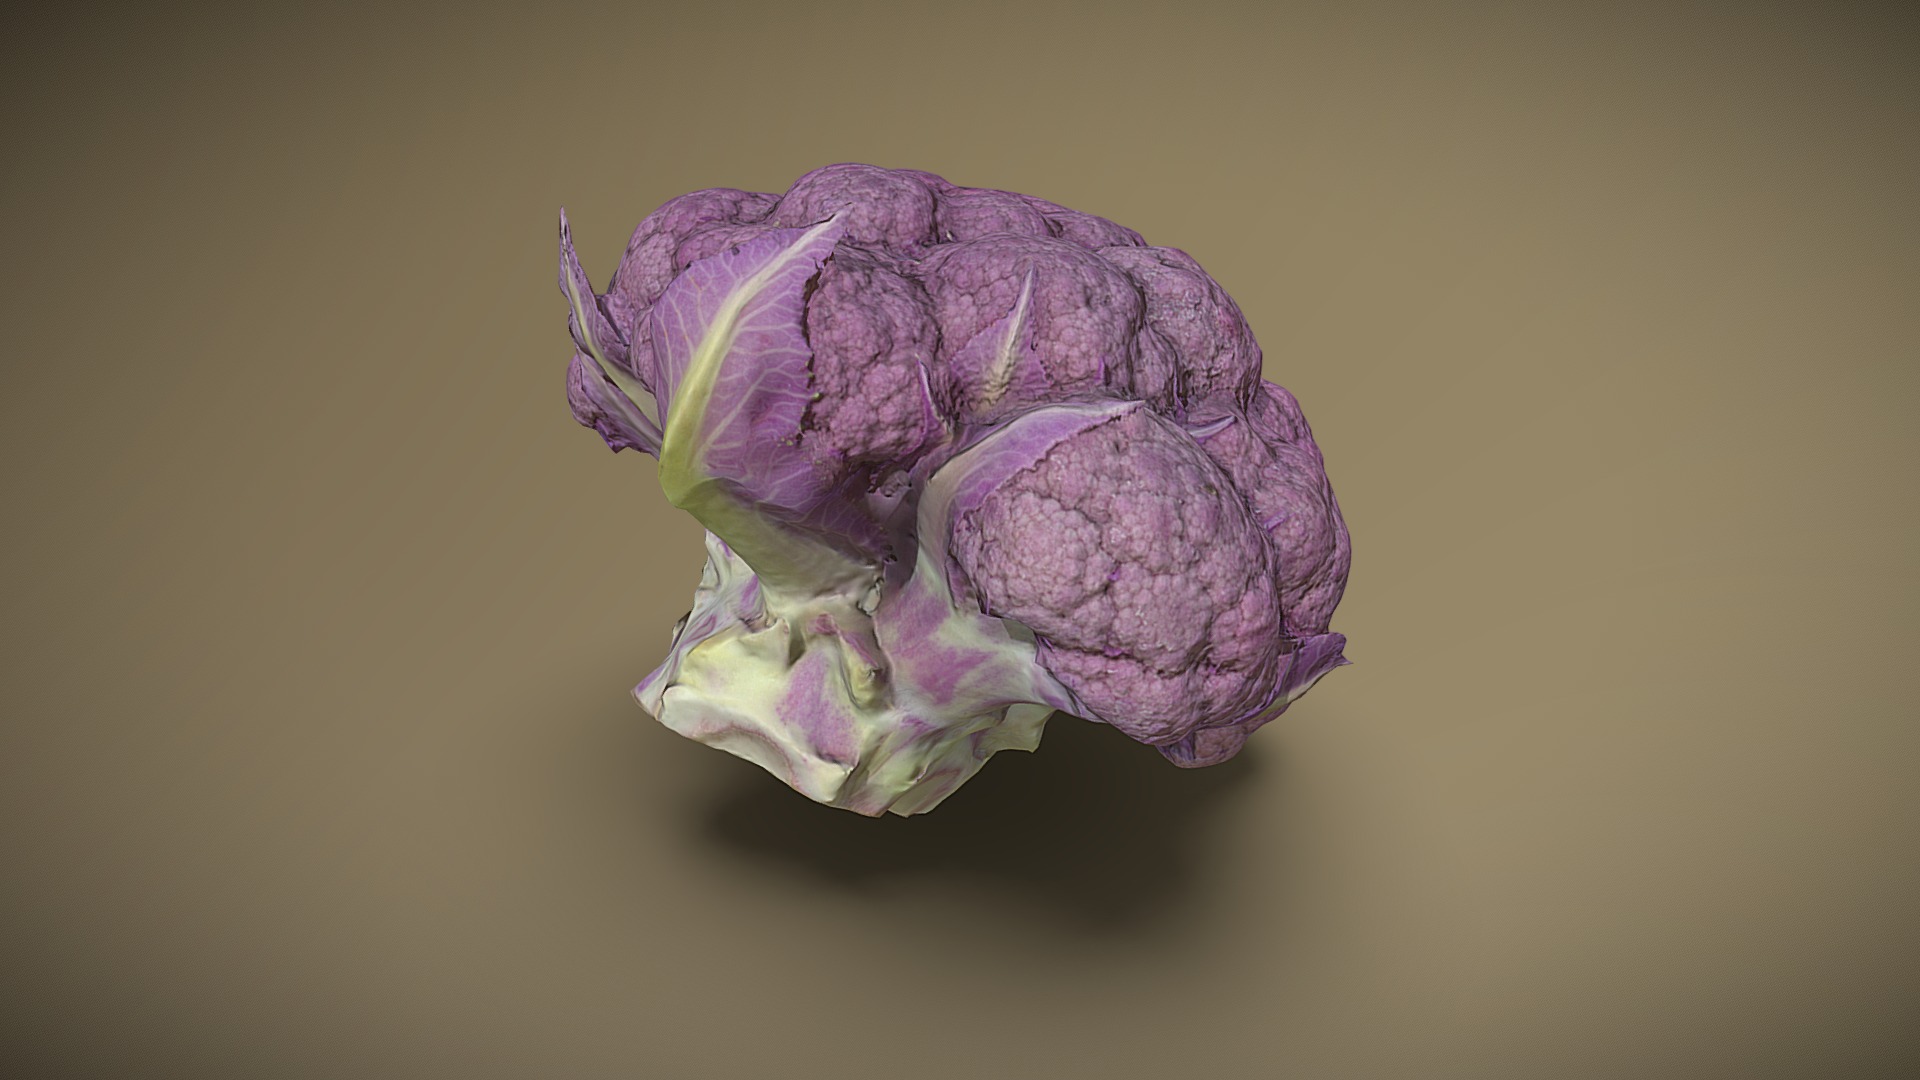 3D model Purple cauliflower - This is a 3D model of the Purple cauliflower. The 3D model is about a purple flower with a yellow center.